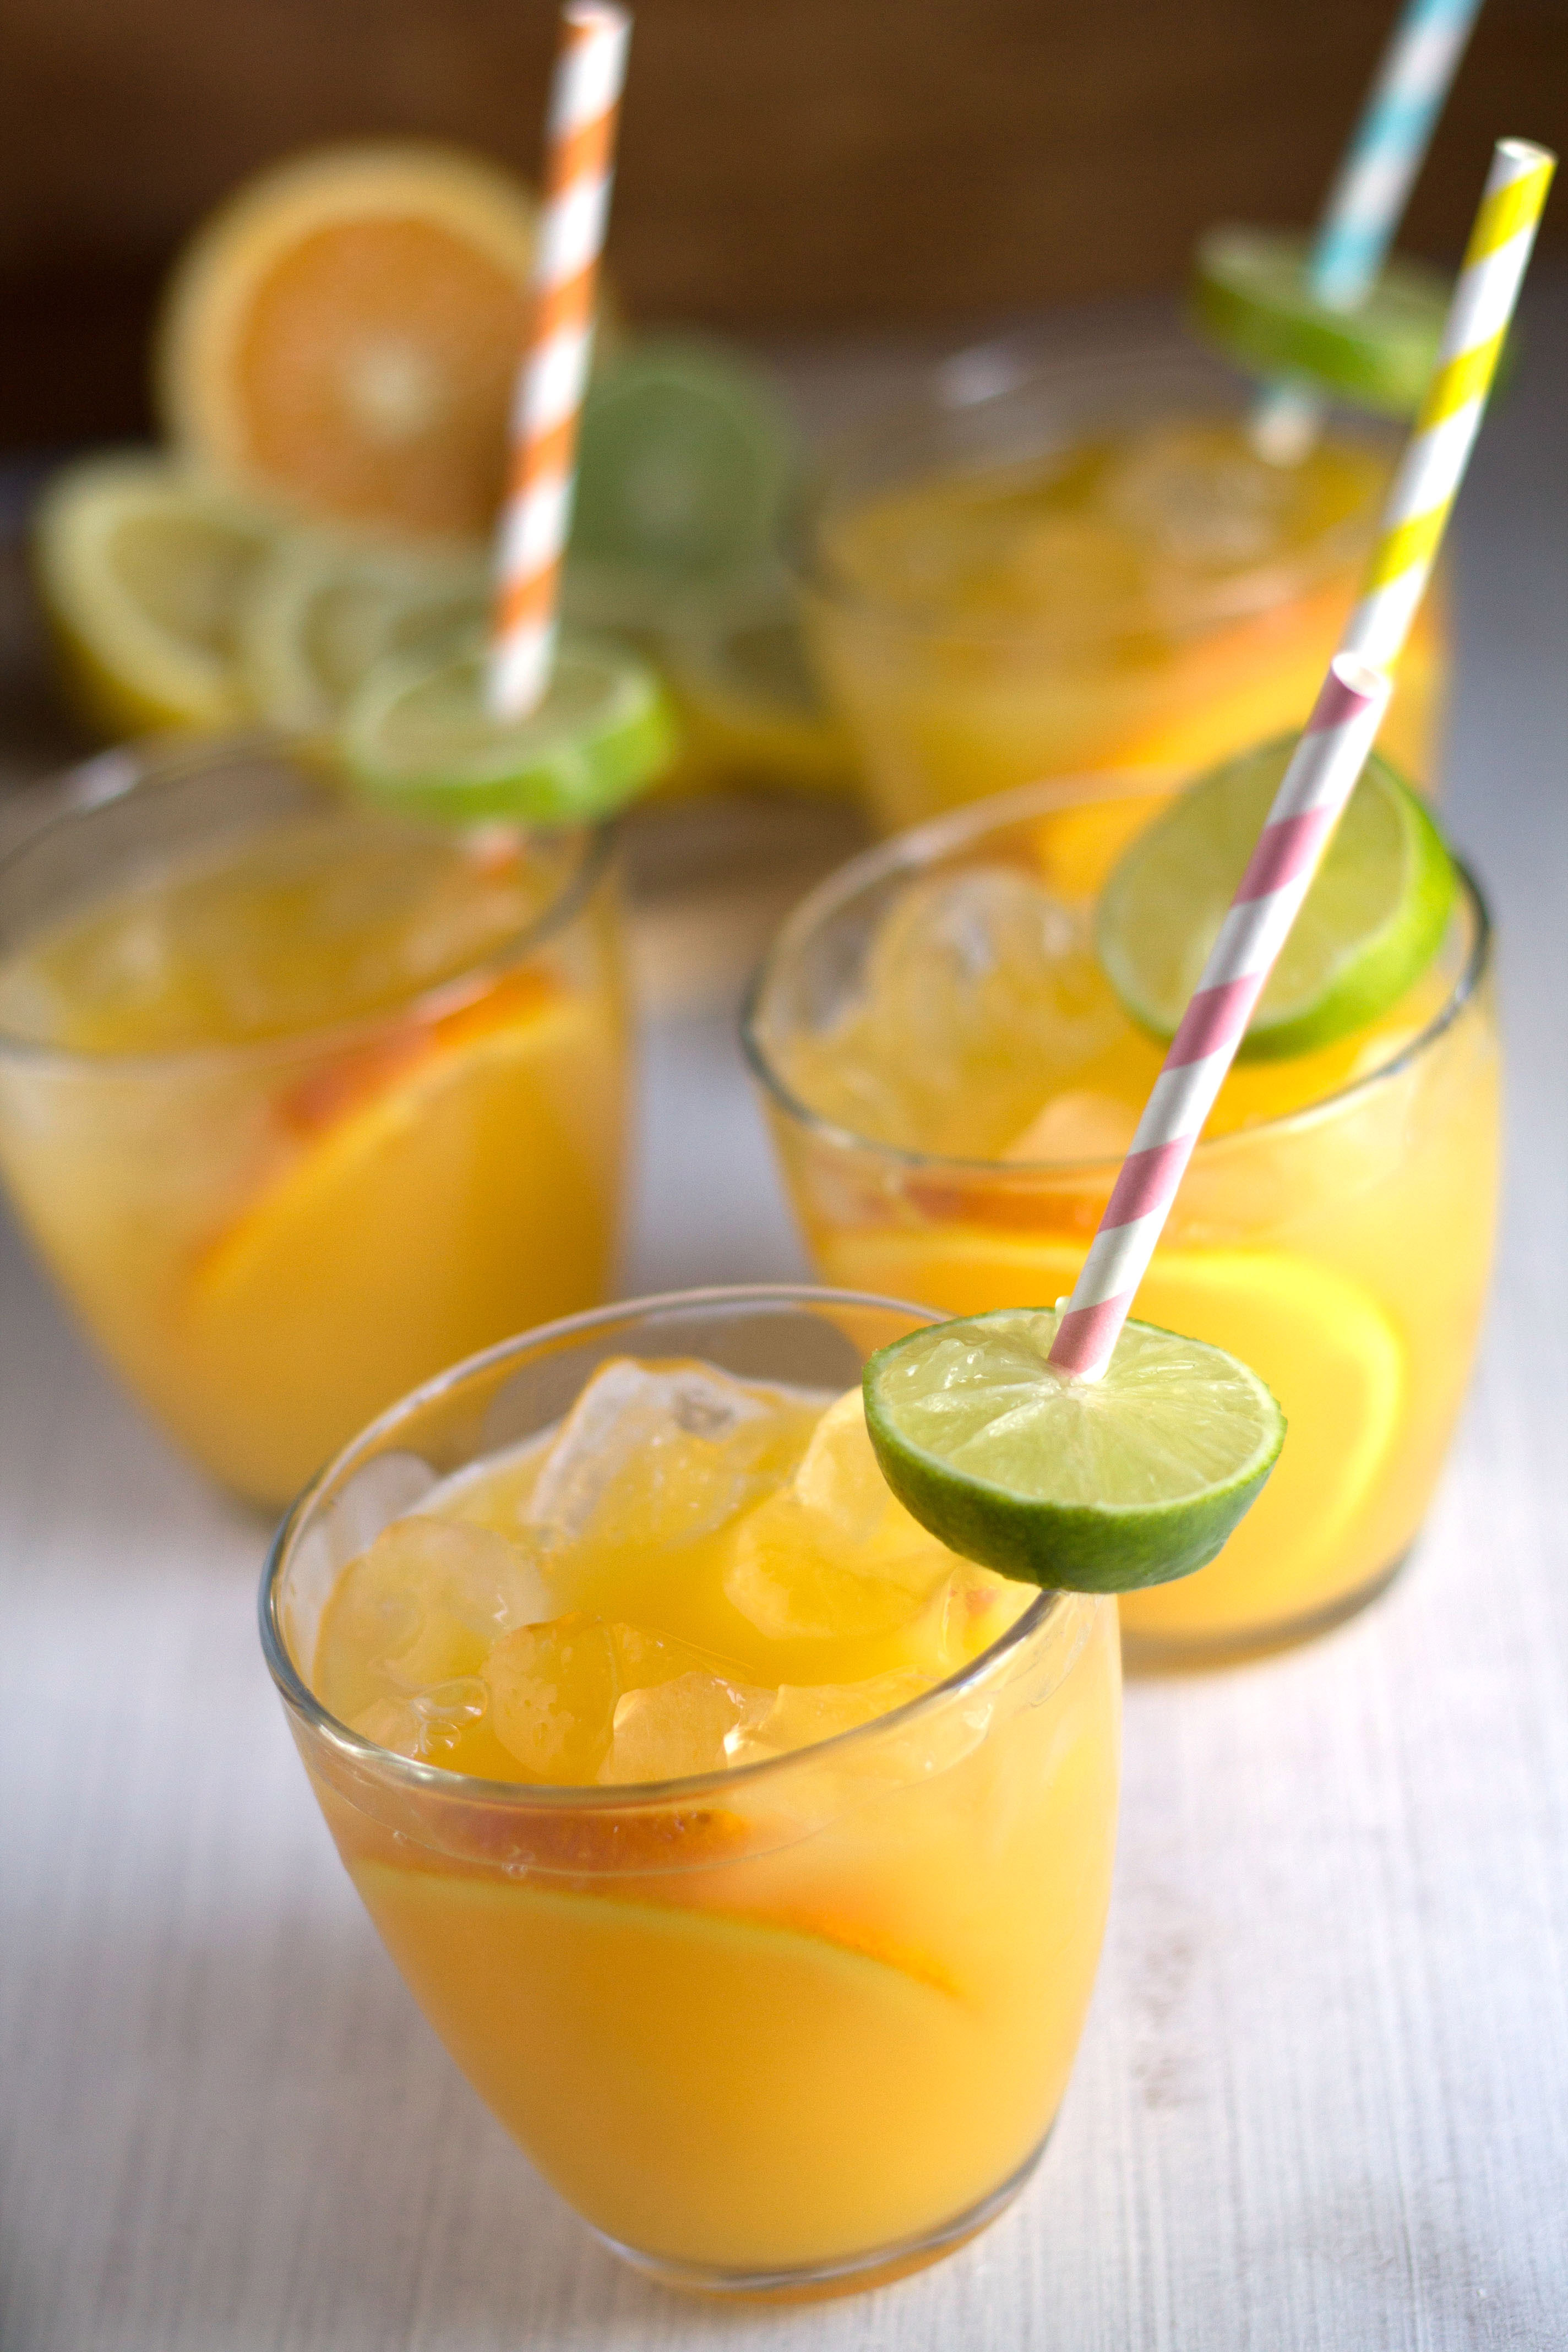 20 New Years Eve Drink Recipes for Kids